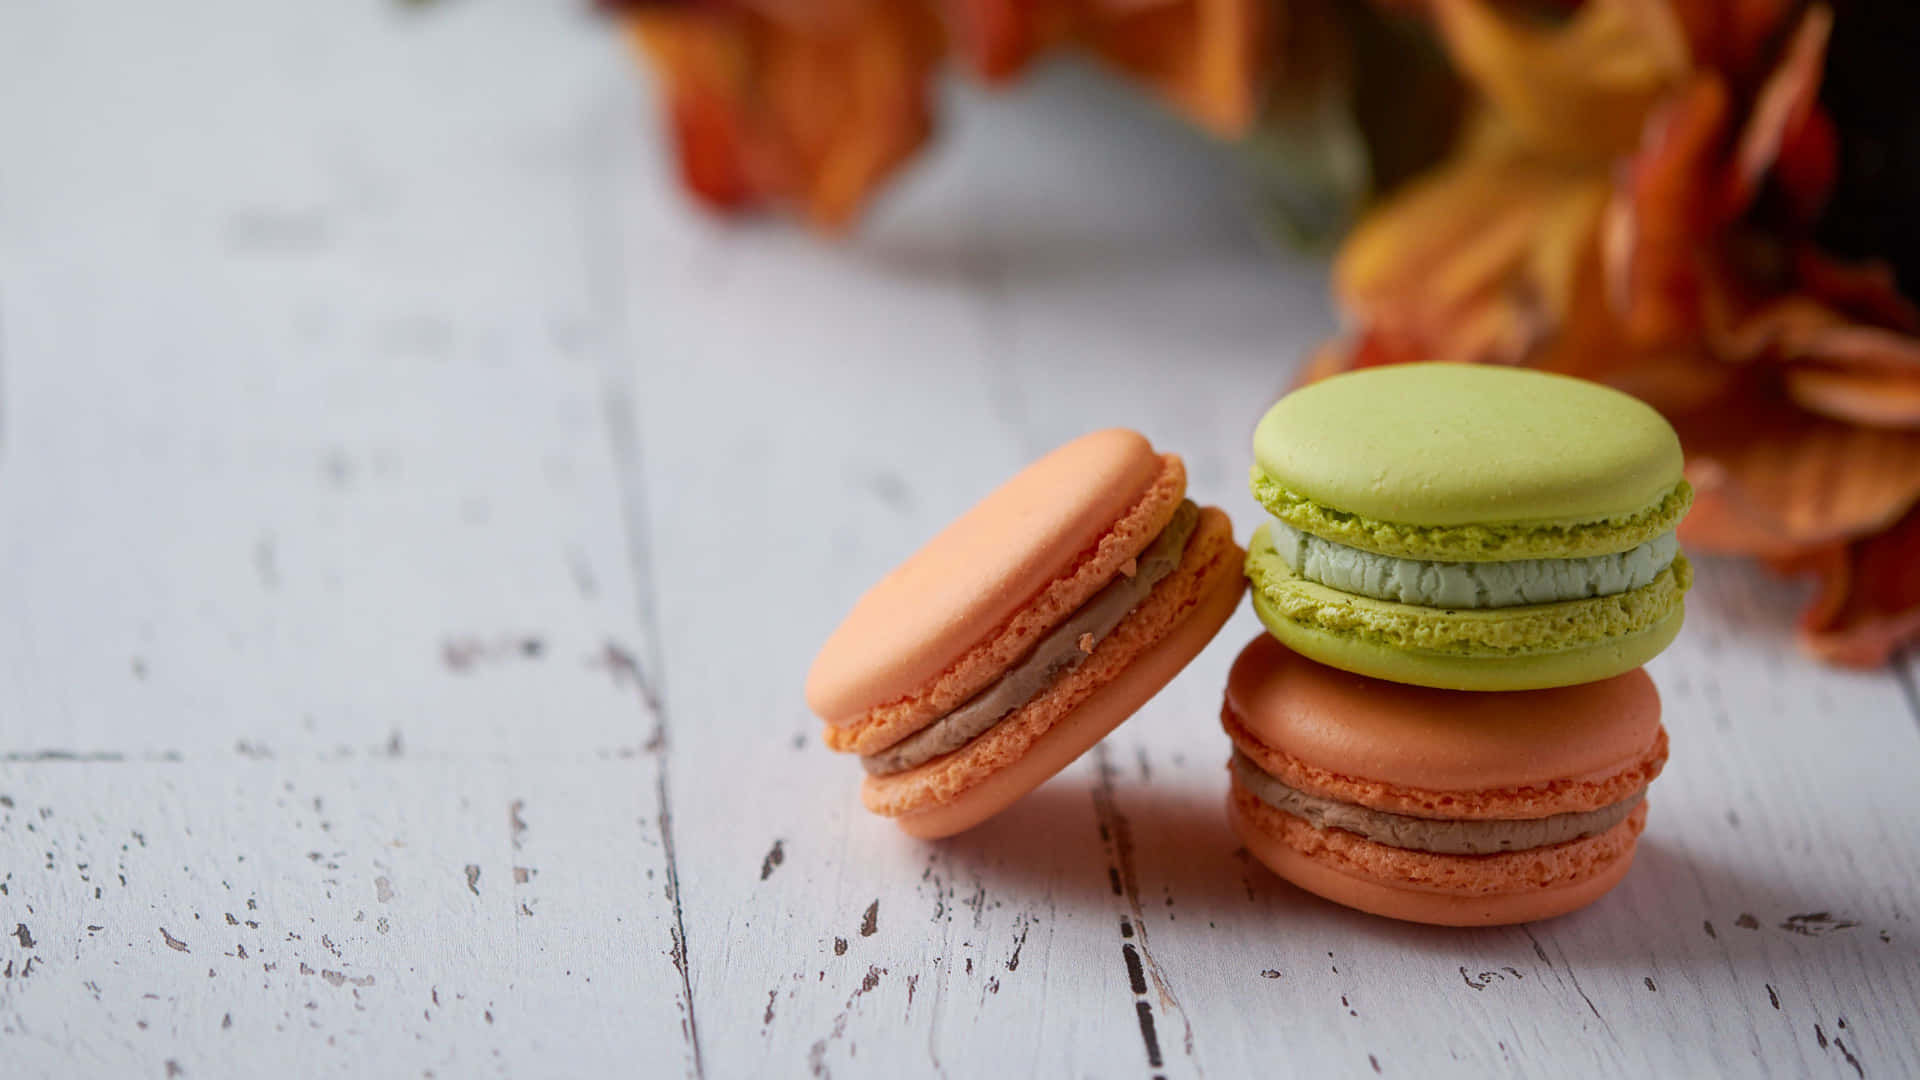 Landscape Cakes And Pastries Macaron Wallpaper